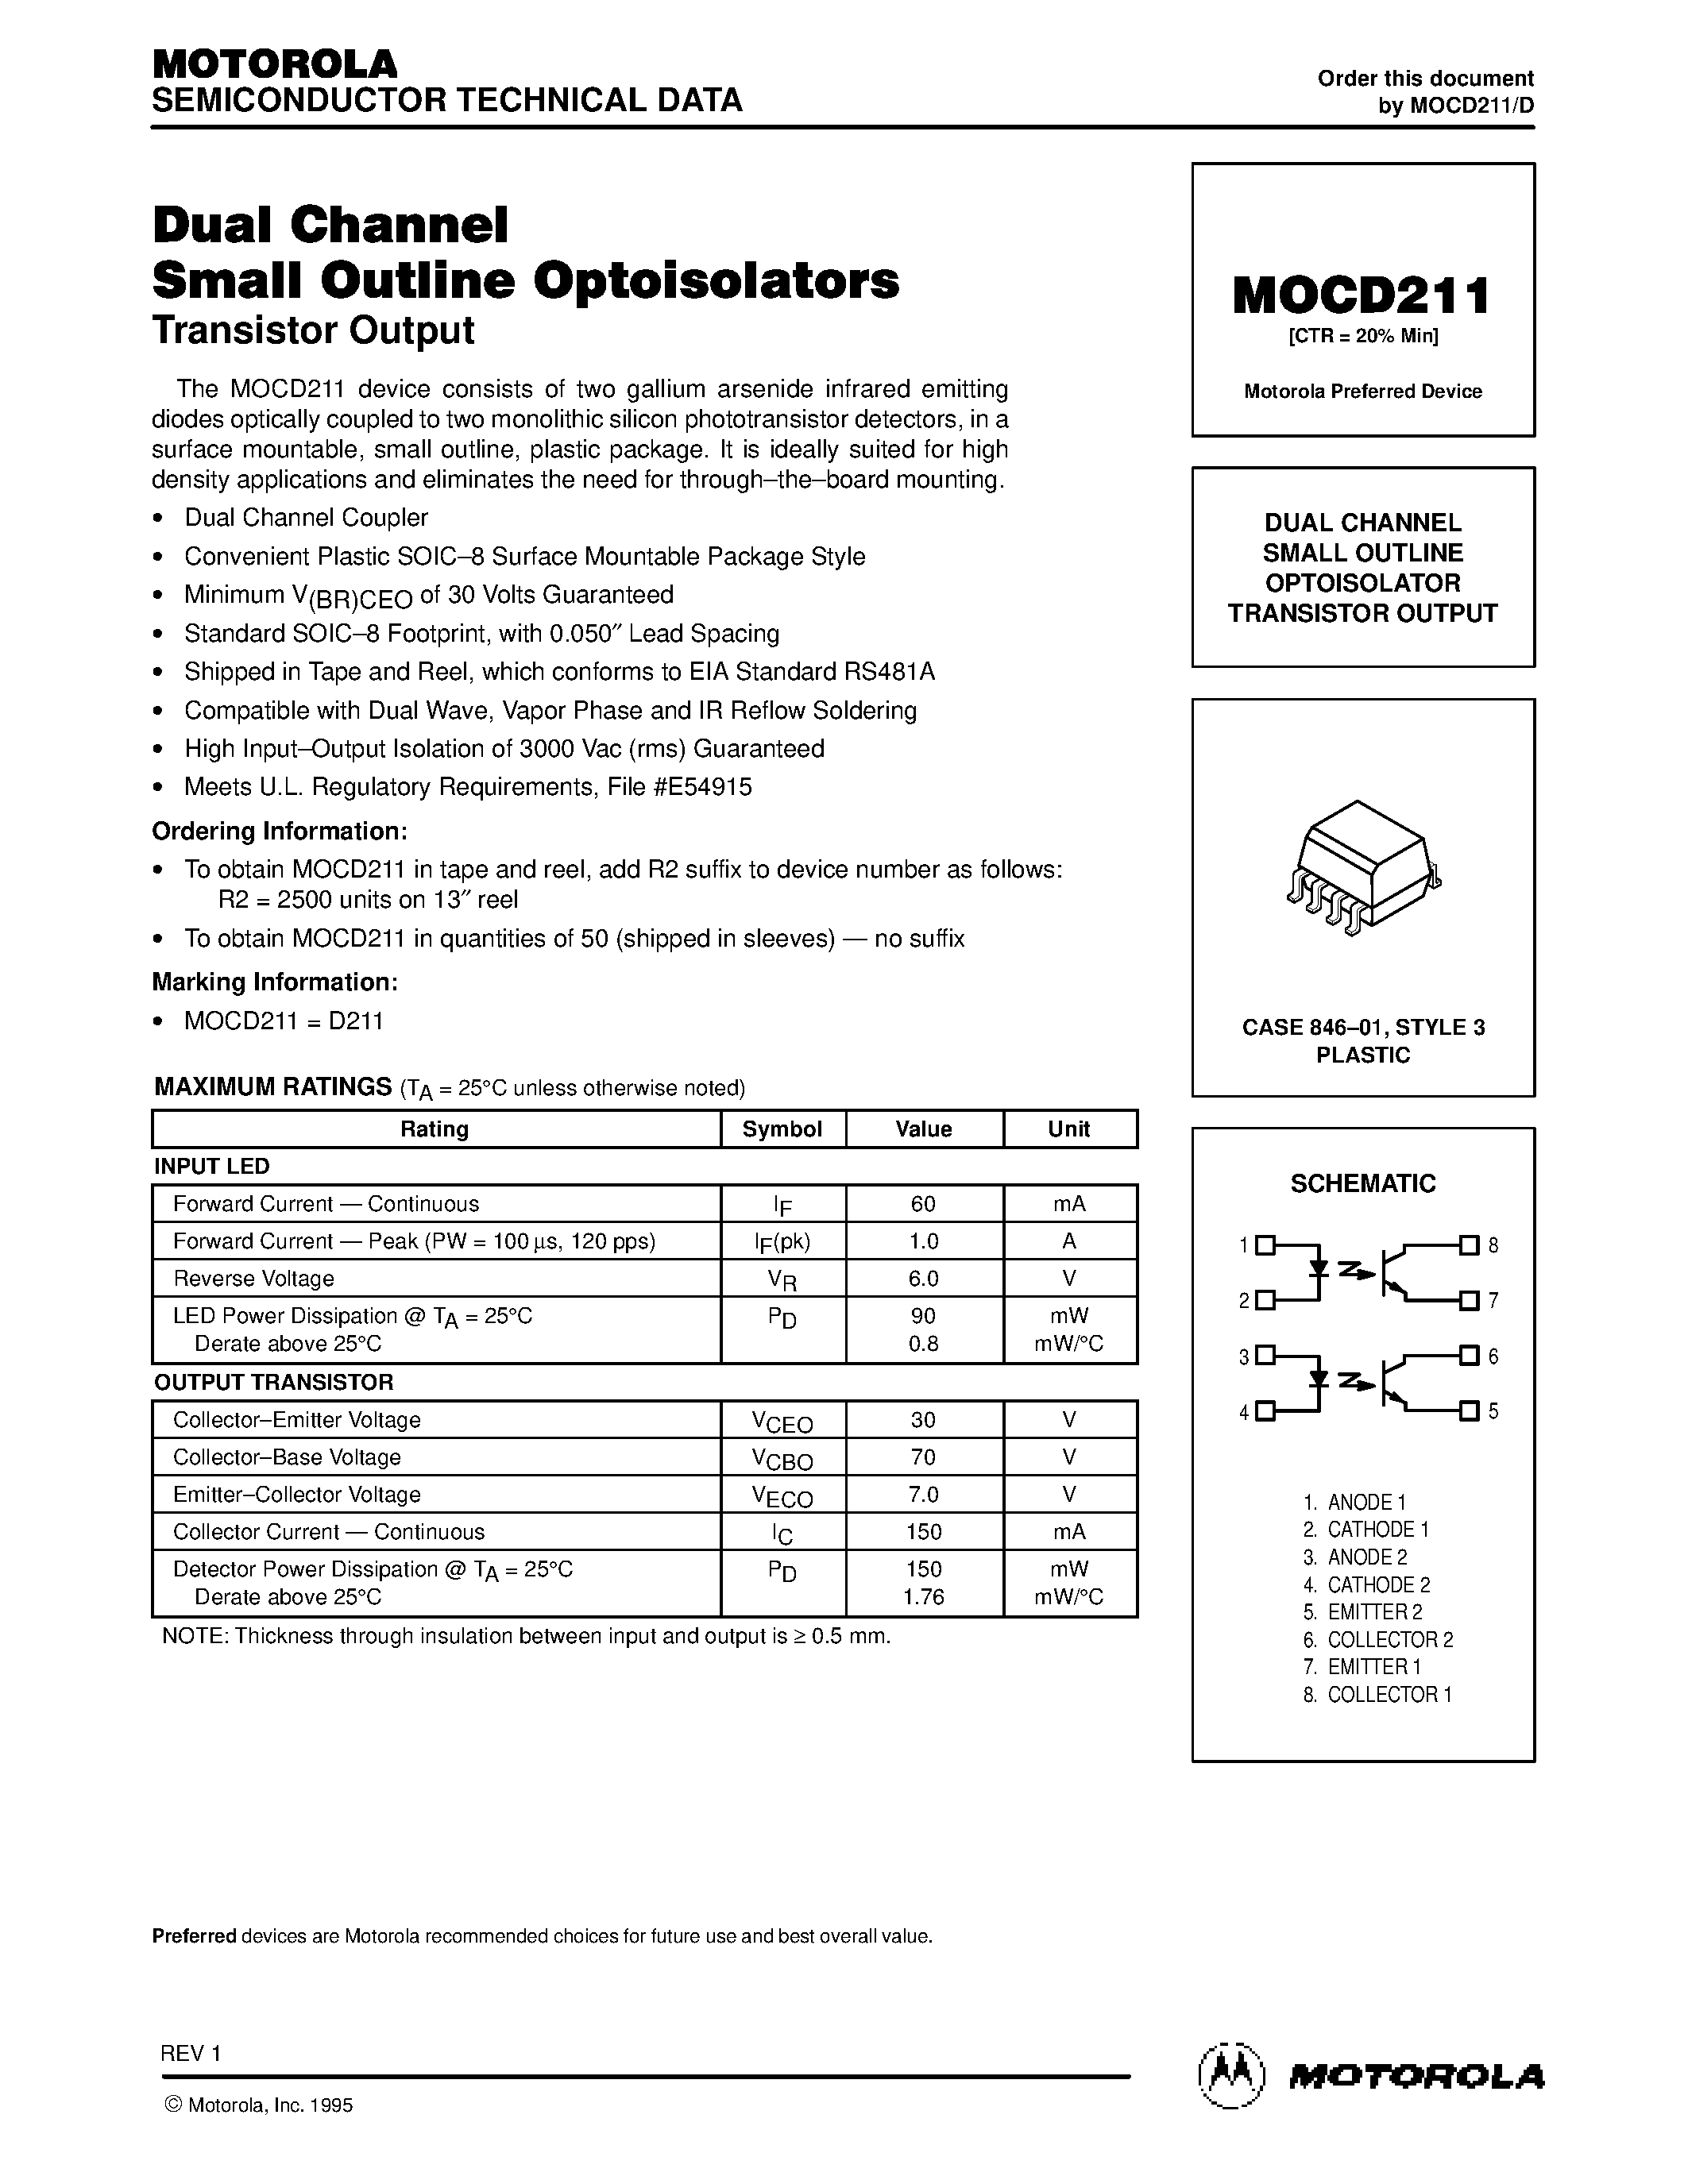 Datasheet MOCD211 - DUAL CHANNEL SMALL OUTLINE OPTOISOLATOR TRANSISTOR OUTPUT page 1